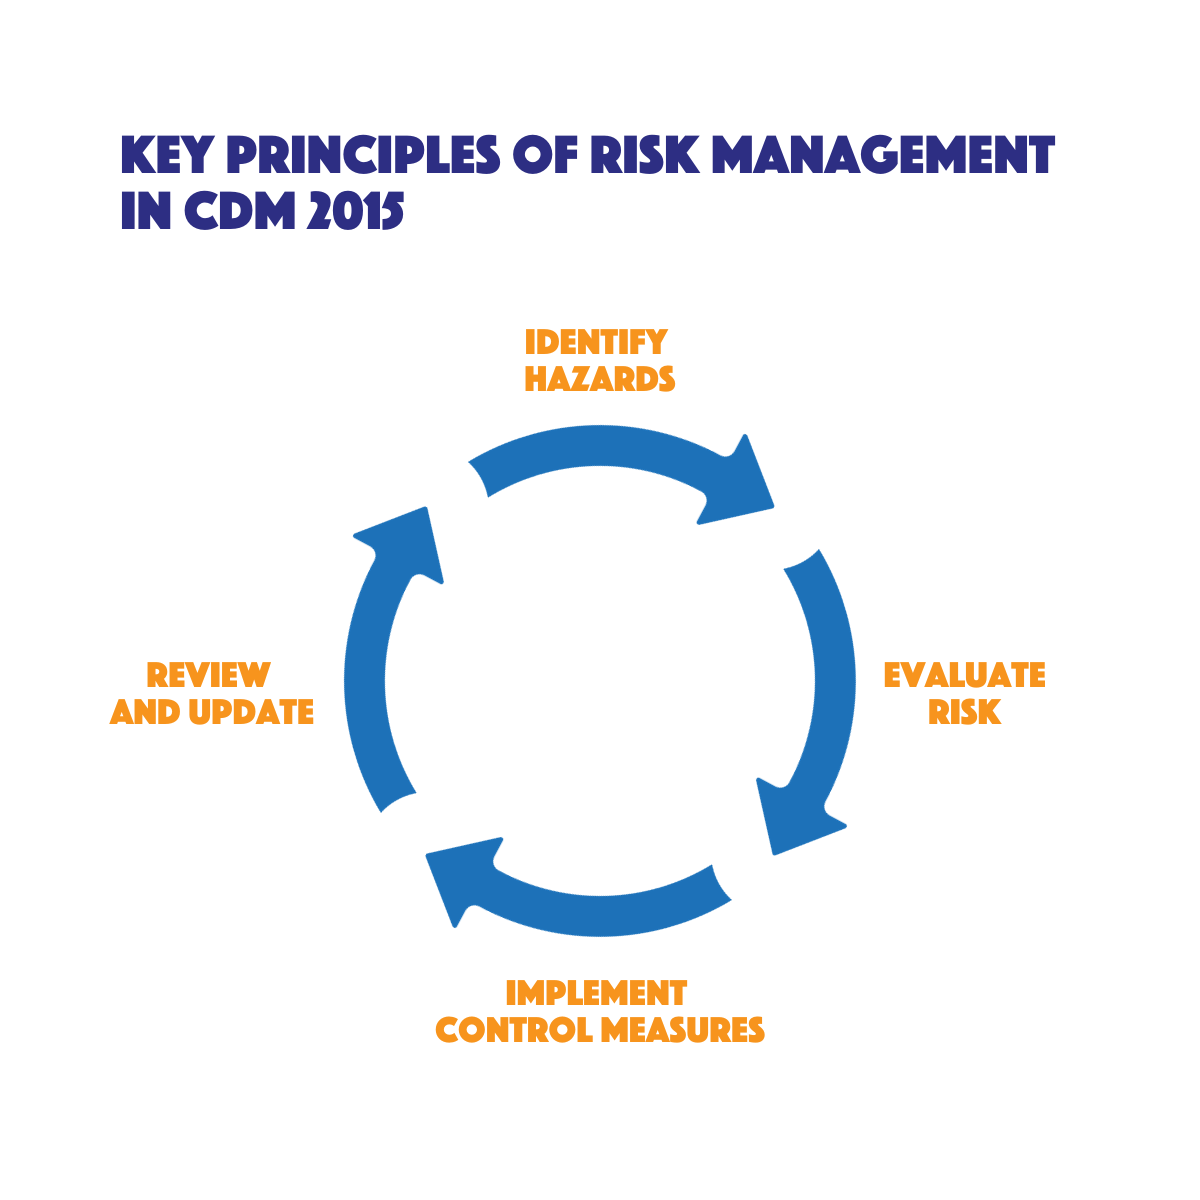 Educational diagram outlining the cyclical process of identifying hazards and evaluating risks in line with CDM 2015 risk management principles.